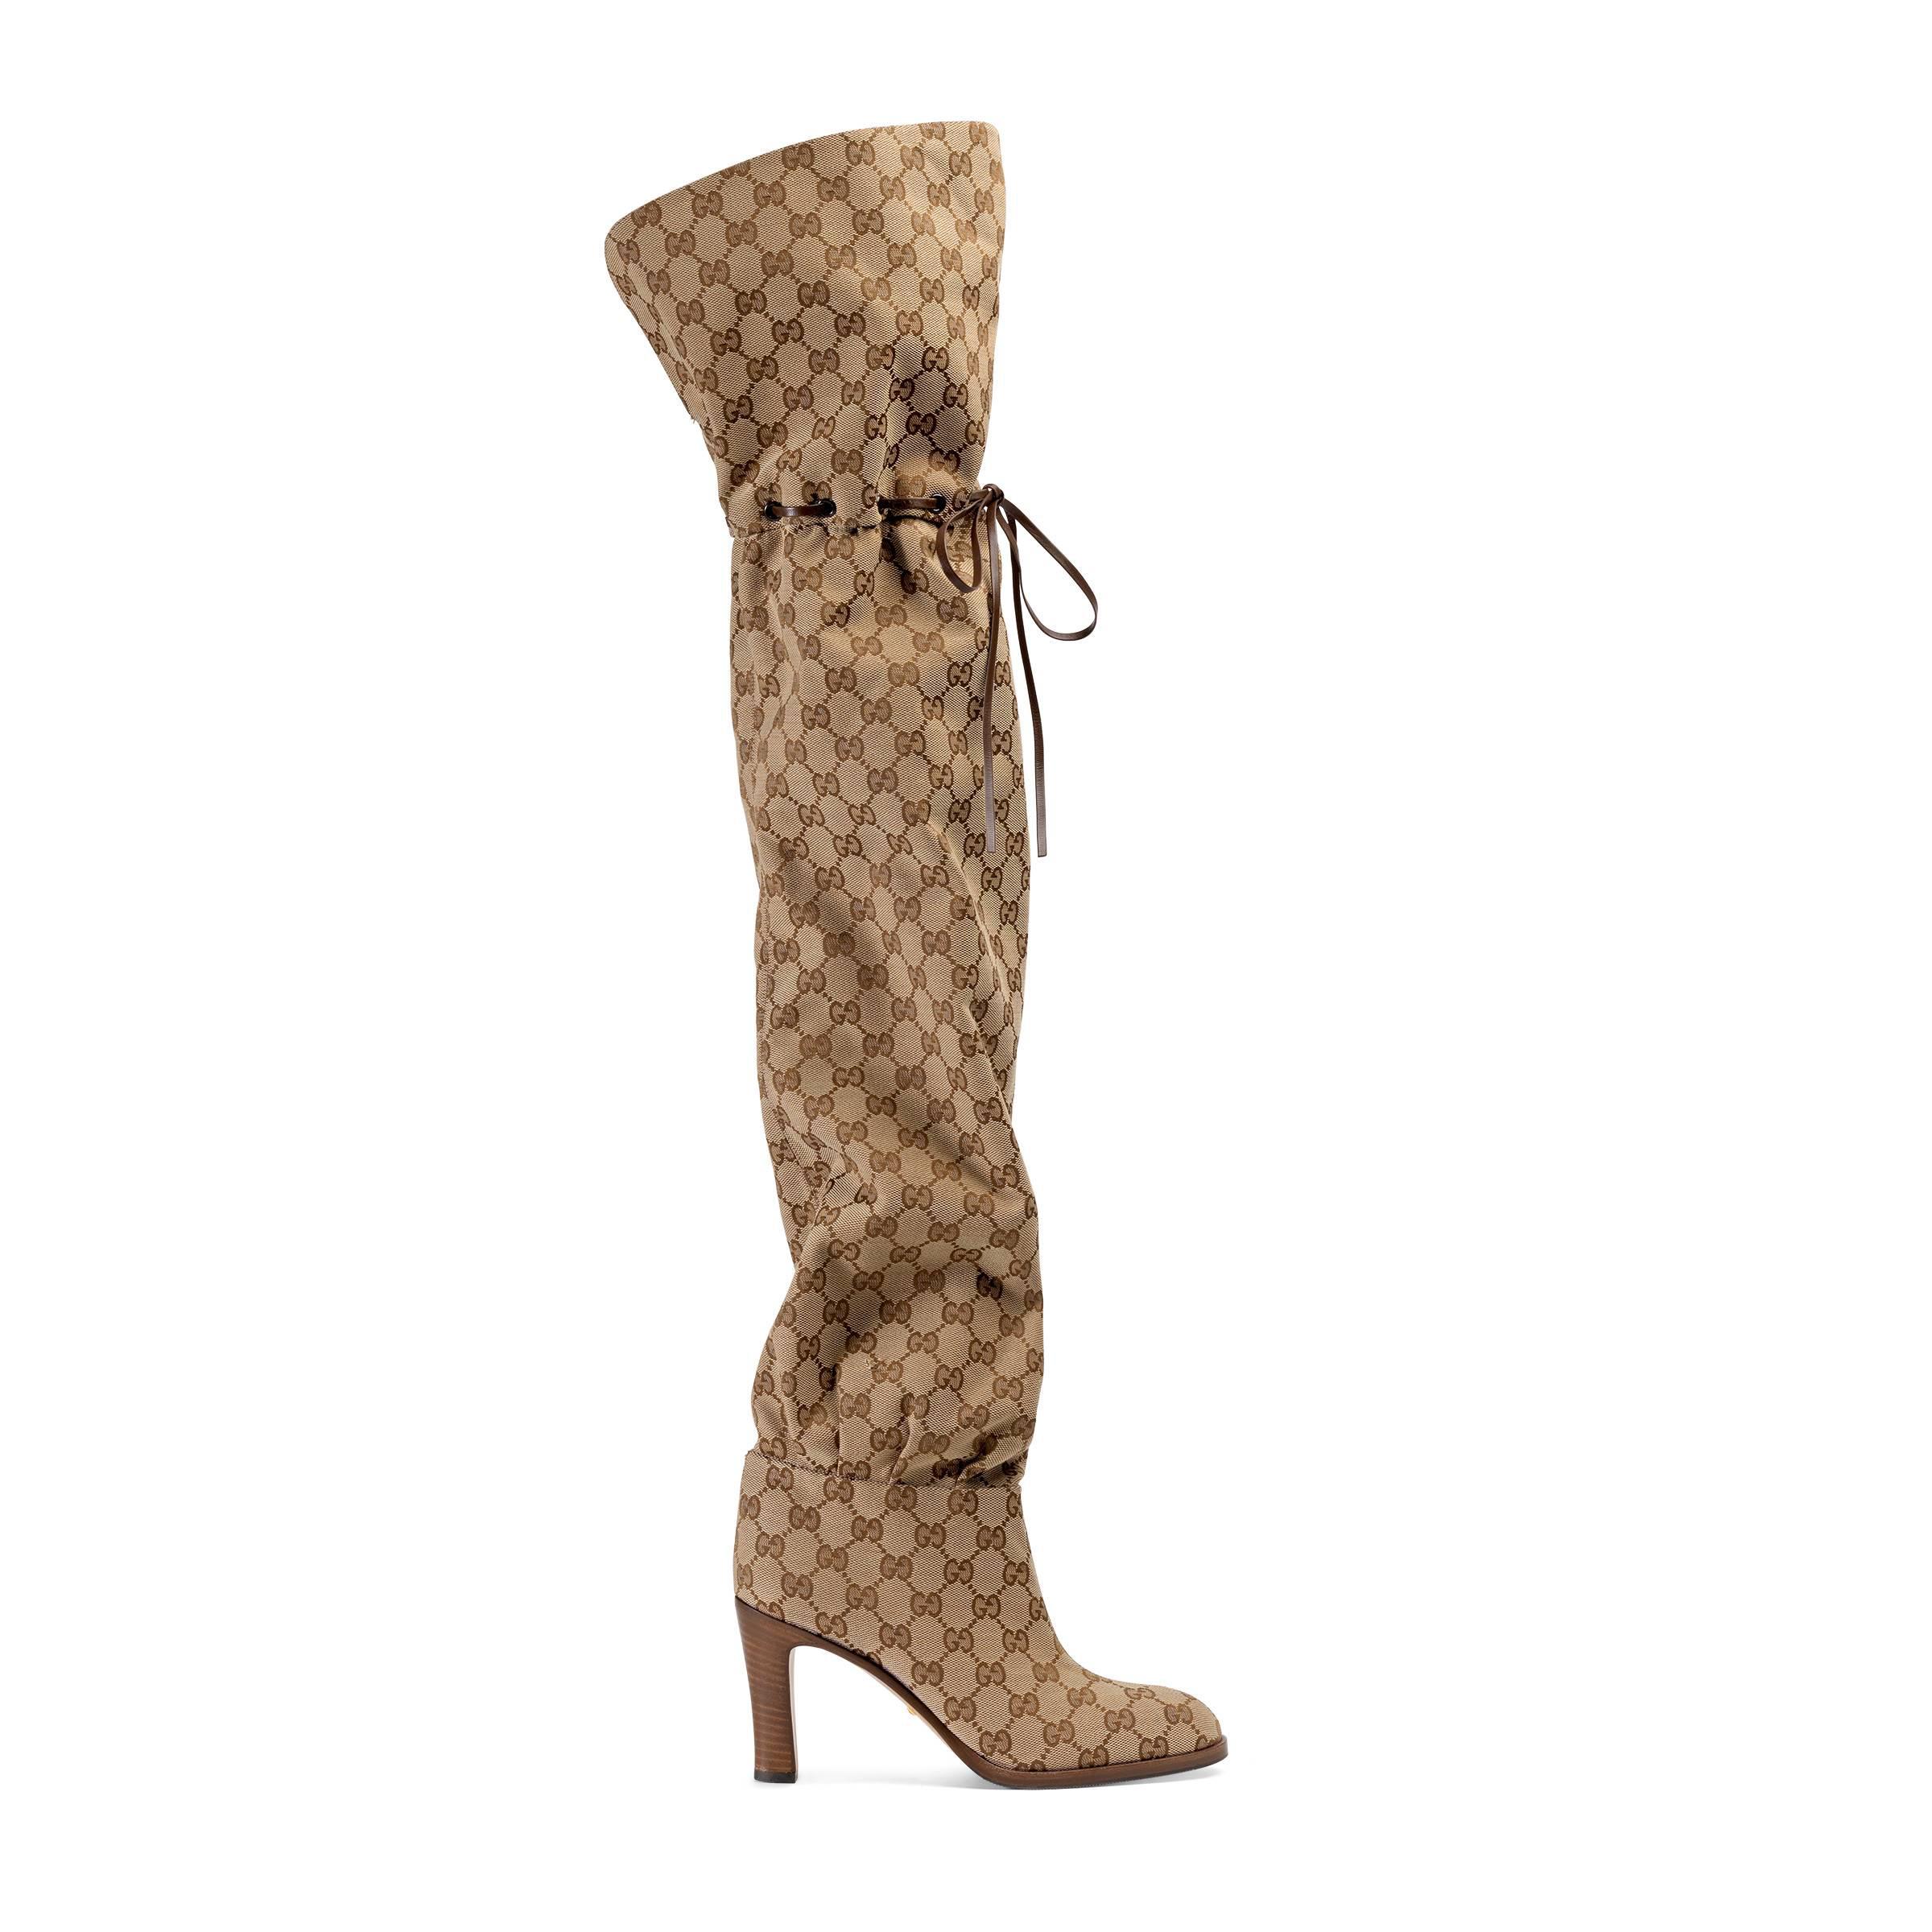 Gucci Women's Metallic Over-The-Knee Boots